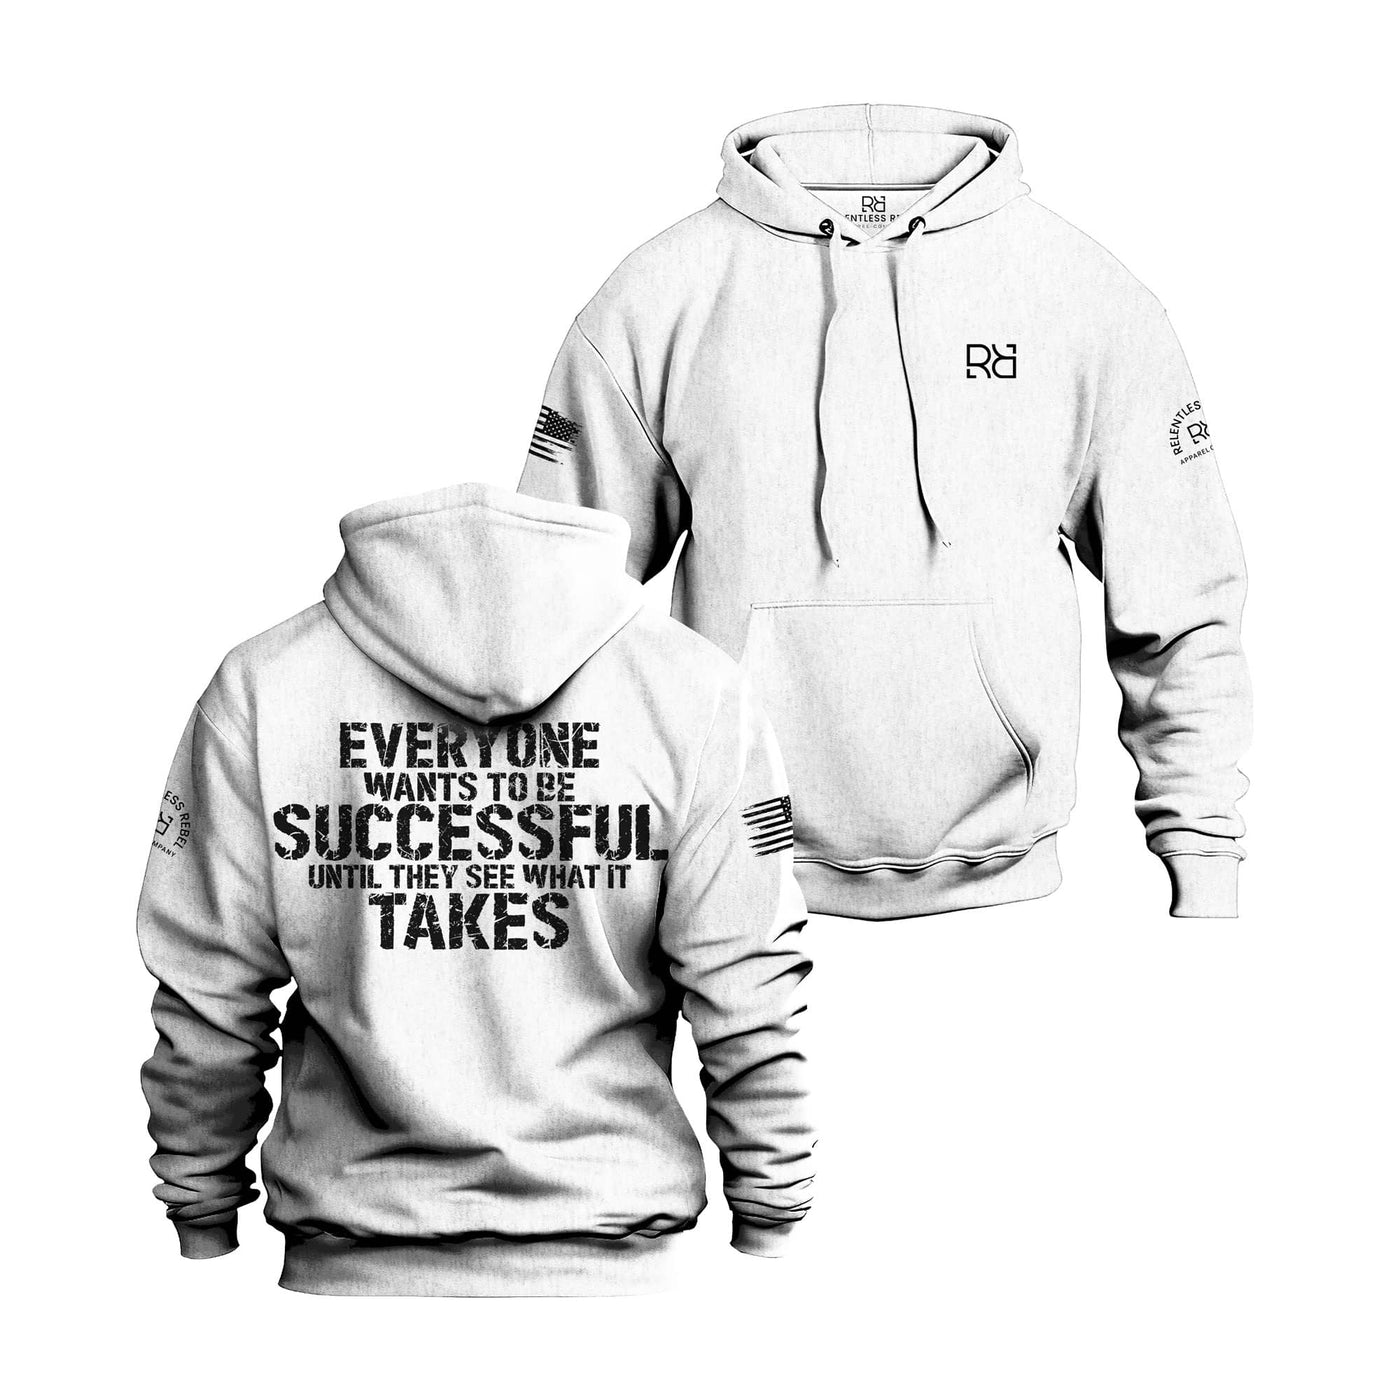 Relentless White Men's Everyone Wants to Be Successful Back Design Hoodie